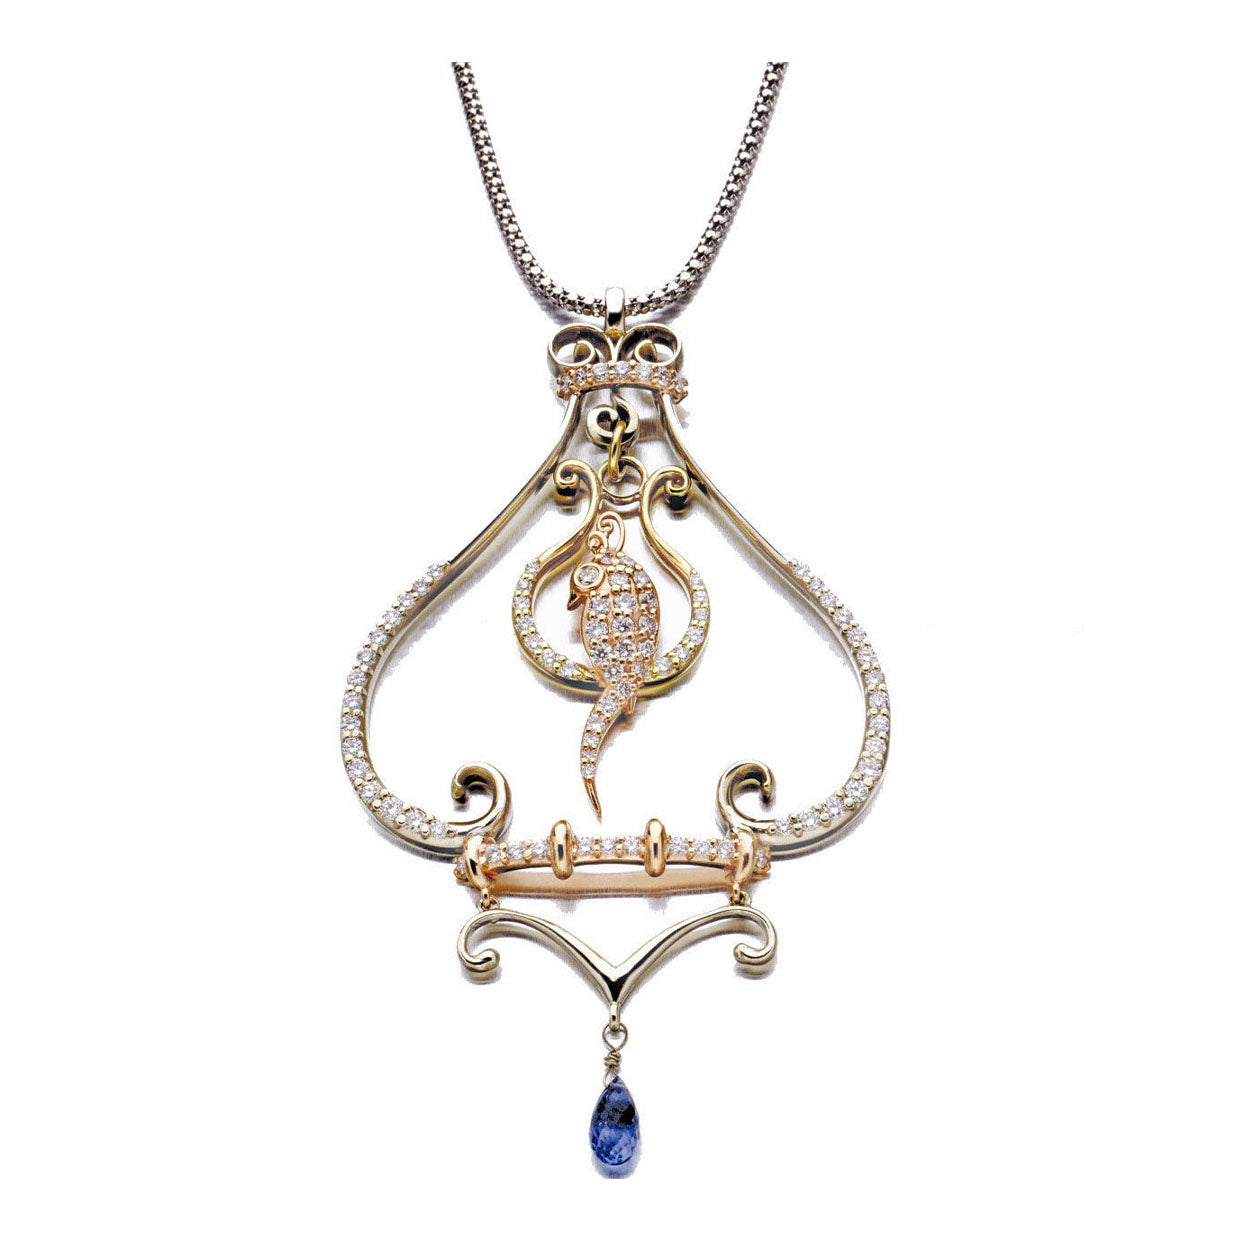 Crafted in 14KT yellow, white and rose gold, this necklace features a bird atop a delicate curled perch, both set with round brilliant-cut diamonds. A blue sapphire briolette hangs below, adding a regal touch of colour to this piece. 